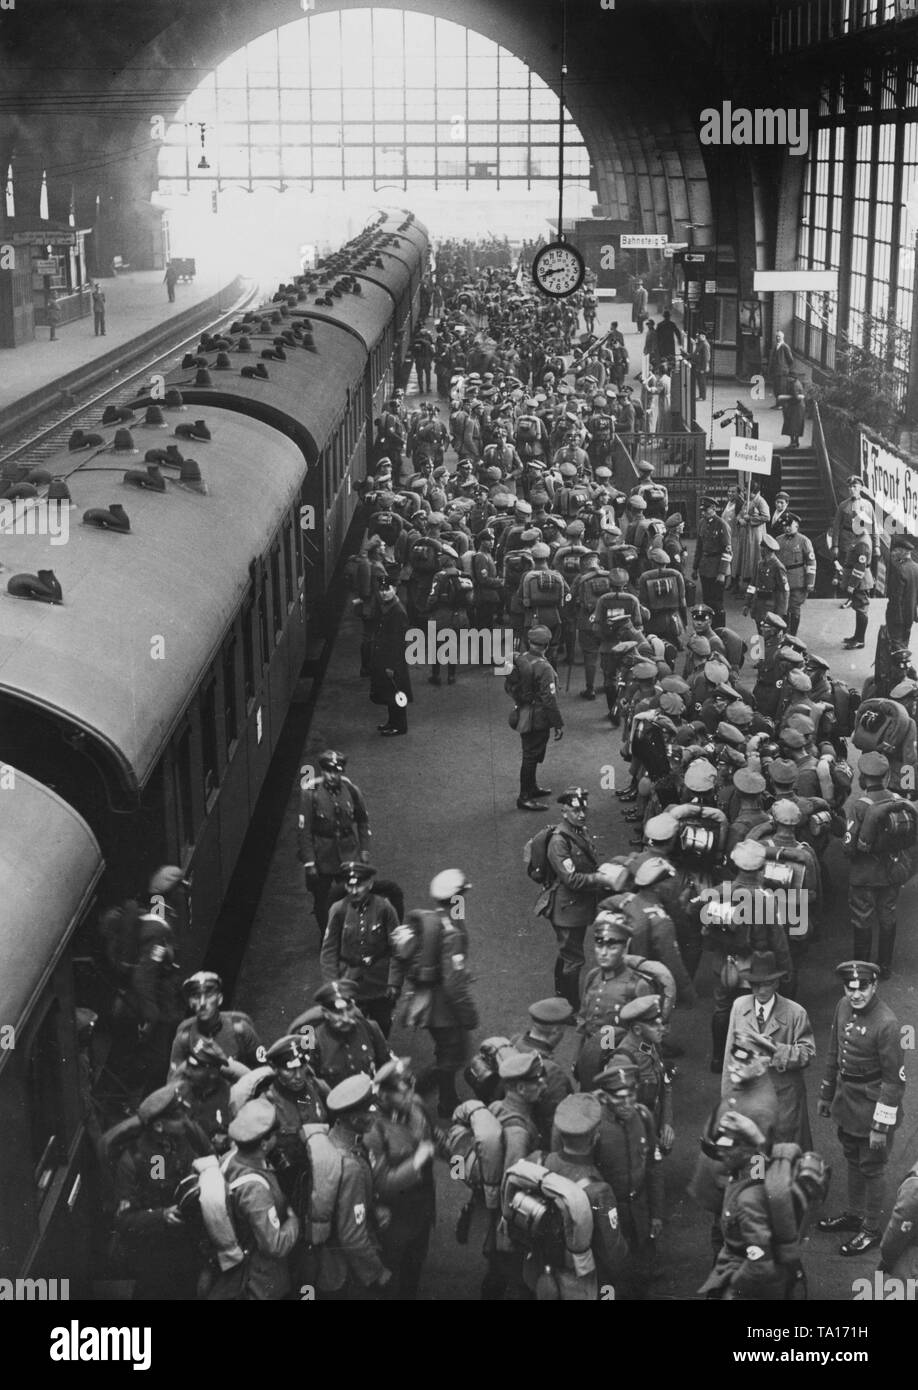 On the occasion of the Reich leadership meeting of the Stahlhelm, a special train with participants from the Ostmarkt and Brandenburg arrives at the Hannover Hauptbahnhof. On the right, a woman carries a sign for the 'Bund Koenigin Luise' (Women's Organization of the Stahlhelm). On the right, there is a banner with the inscription 'Front heil!'. Stock Photo